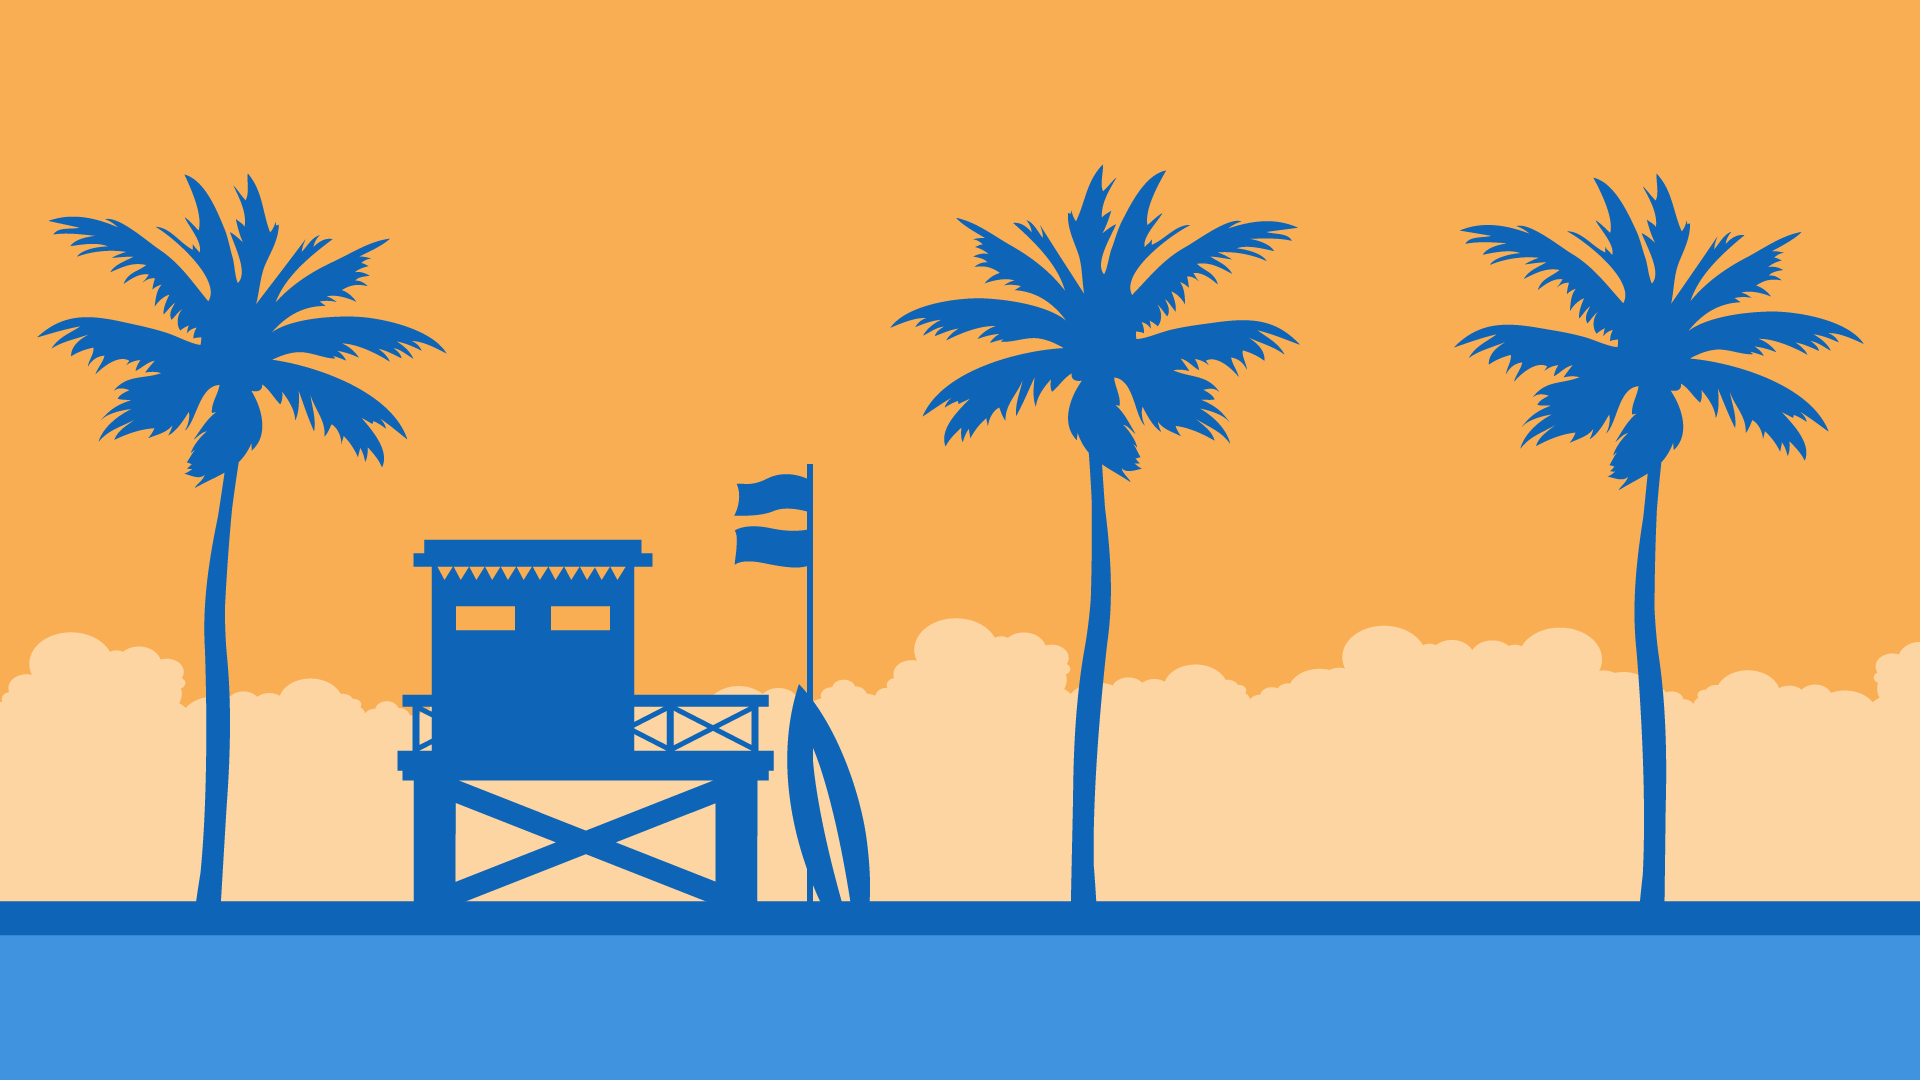 Beach scene with palm trees and lifeguard tower